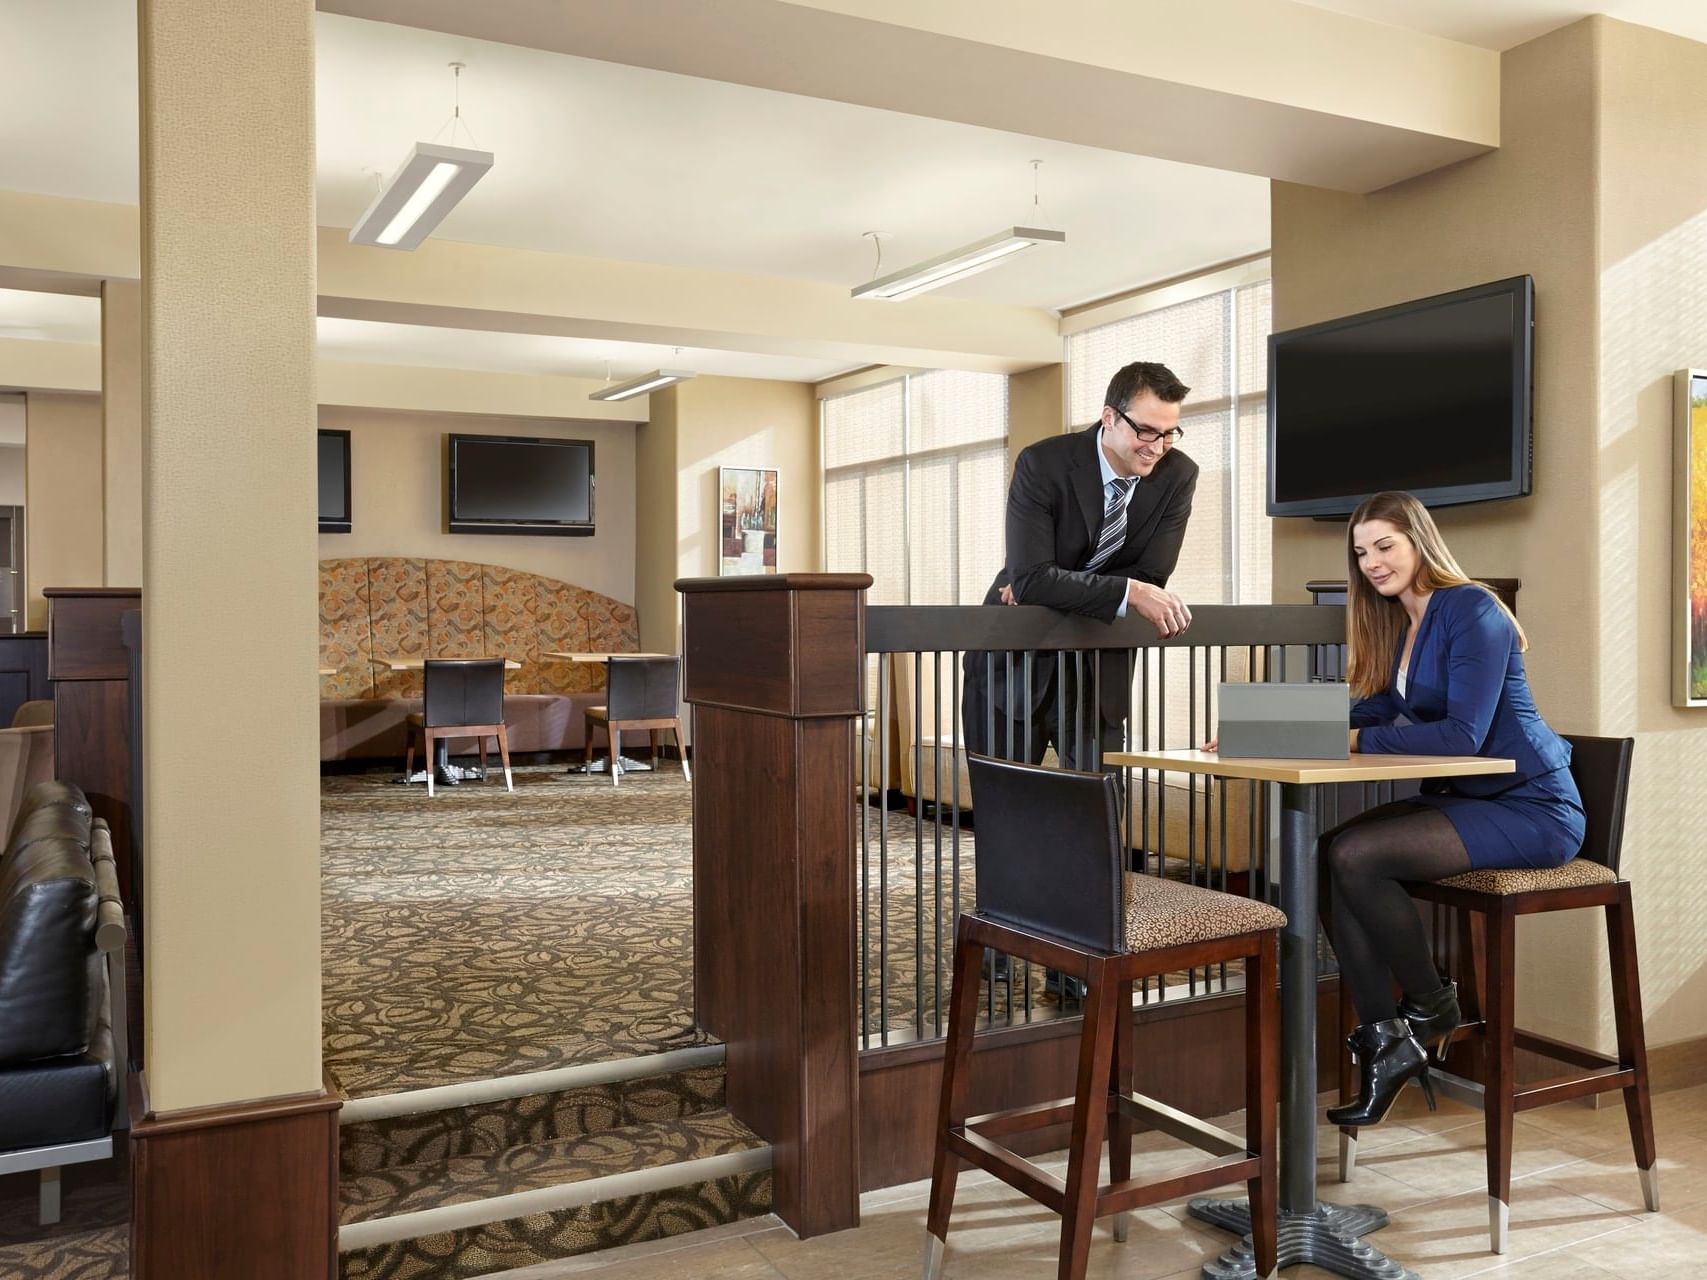 The interior of the Business Center at Clique Hotels & Resorts